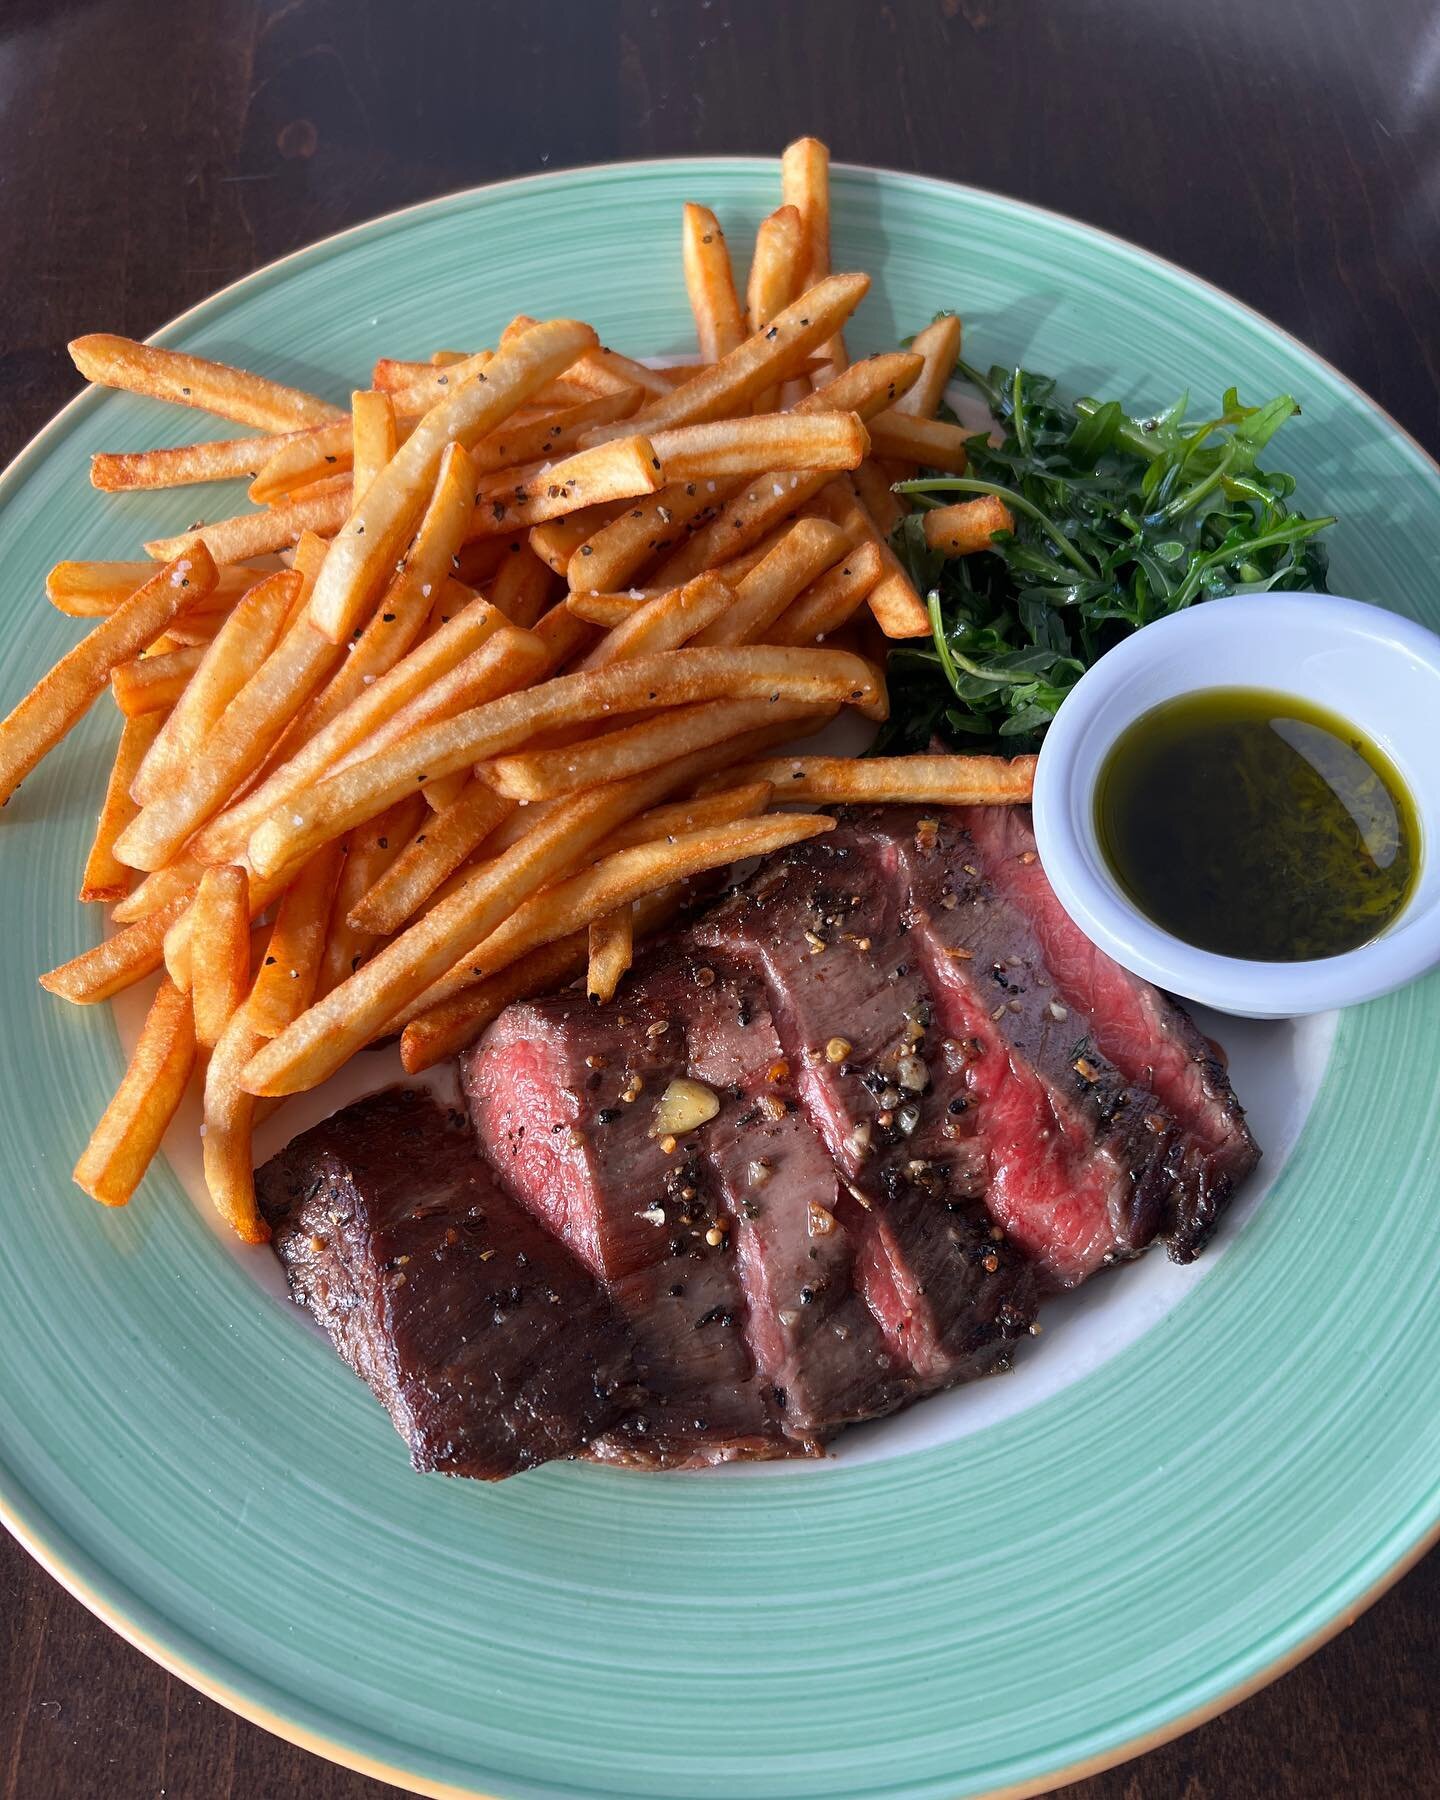 One of our best selling GAME DAY features - Steak Frites! Get it today and add on a glass of wine or a pint and head over to @rogersplace to cheer on our OILERS! Let&rsquo;s do this&hellip;.#yeg #yegdt #oilcountry